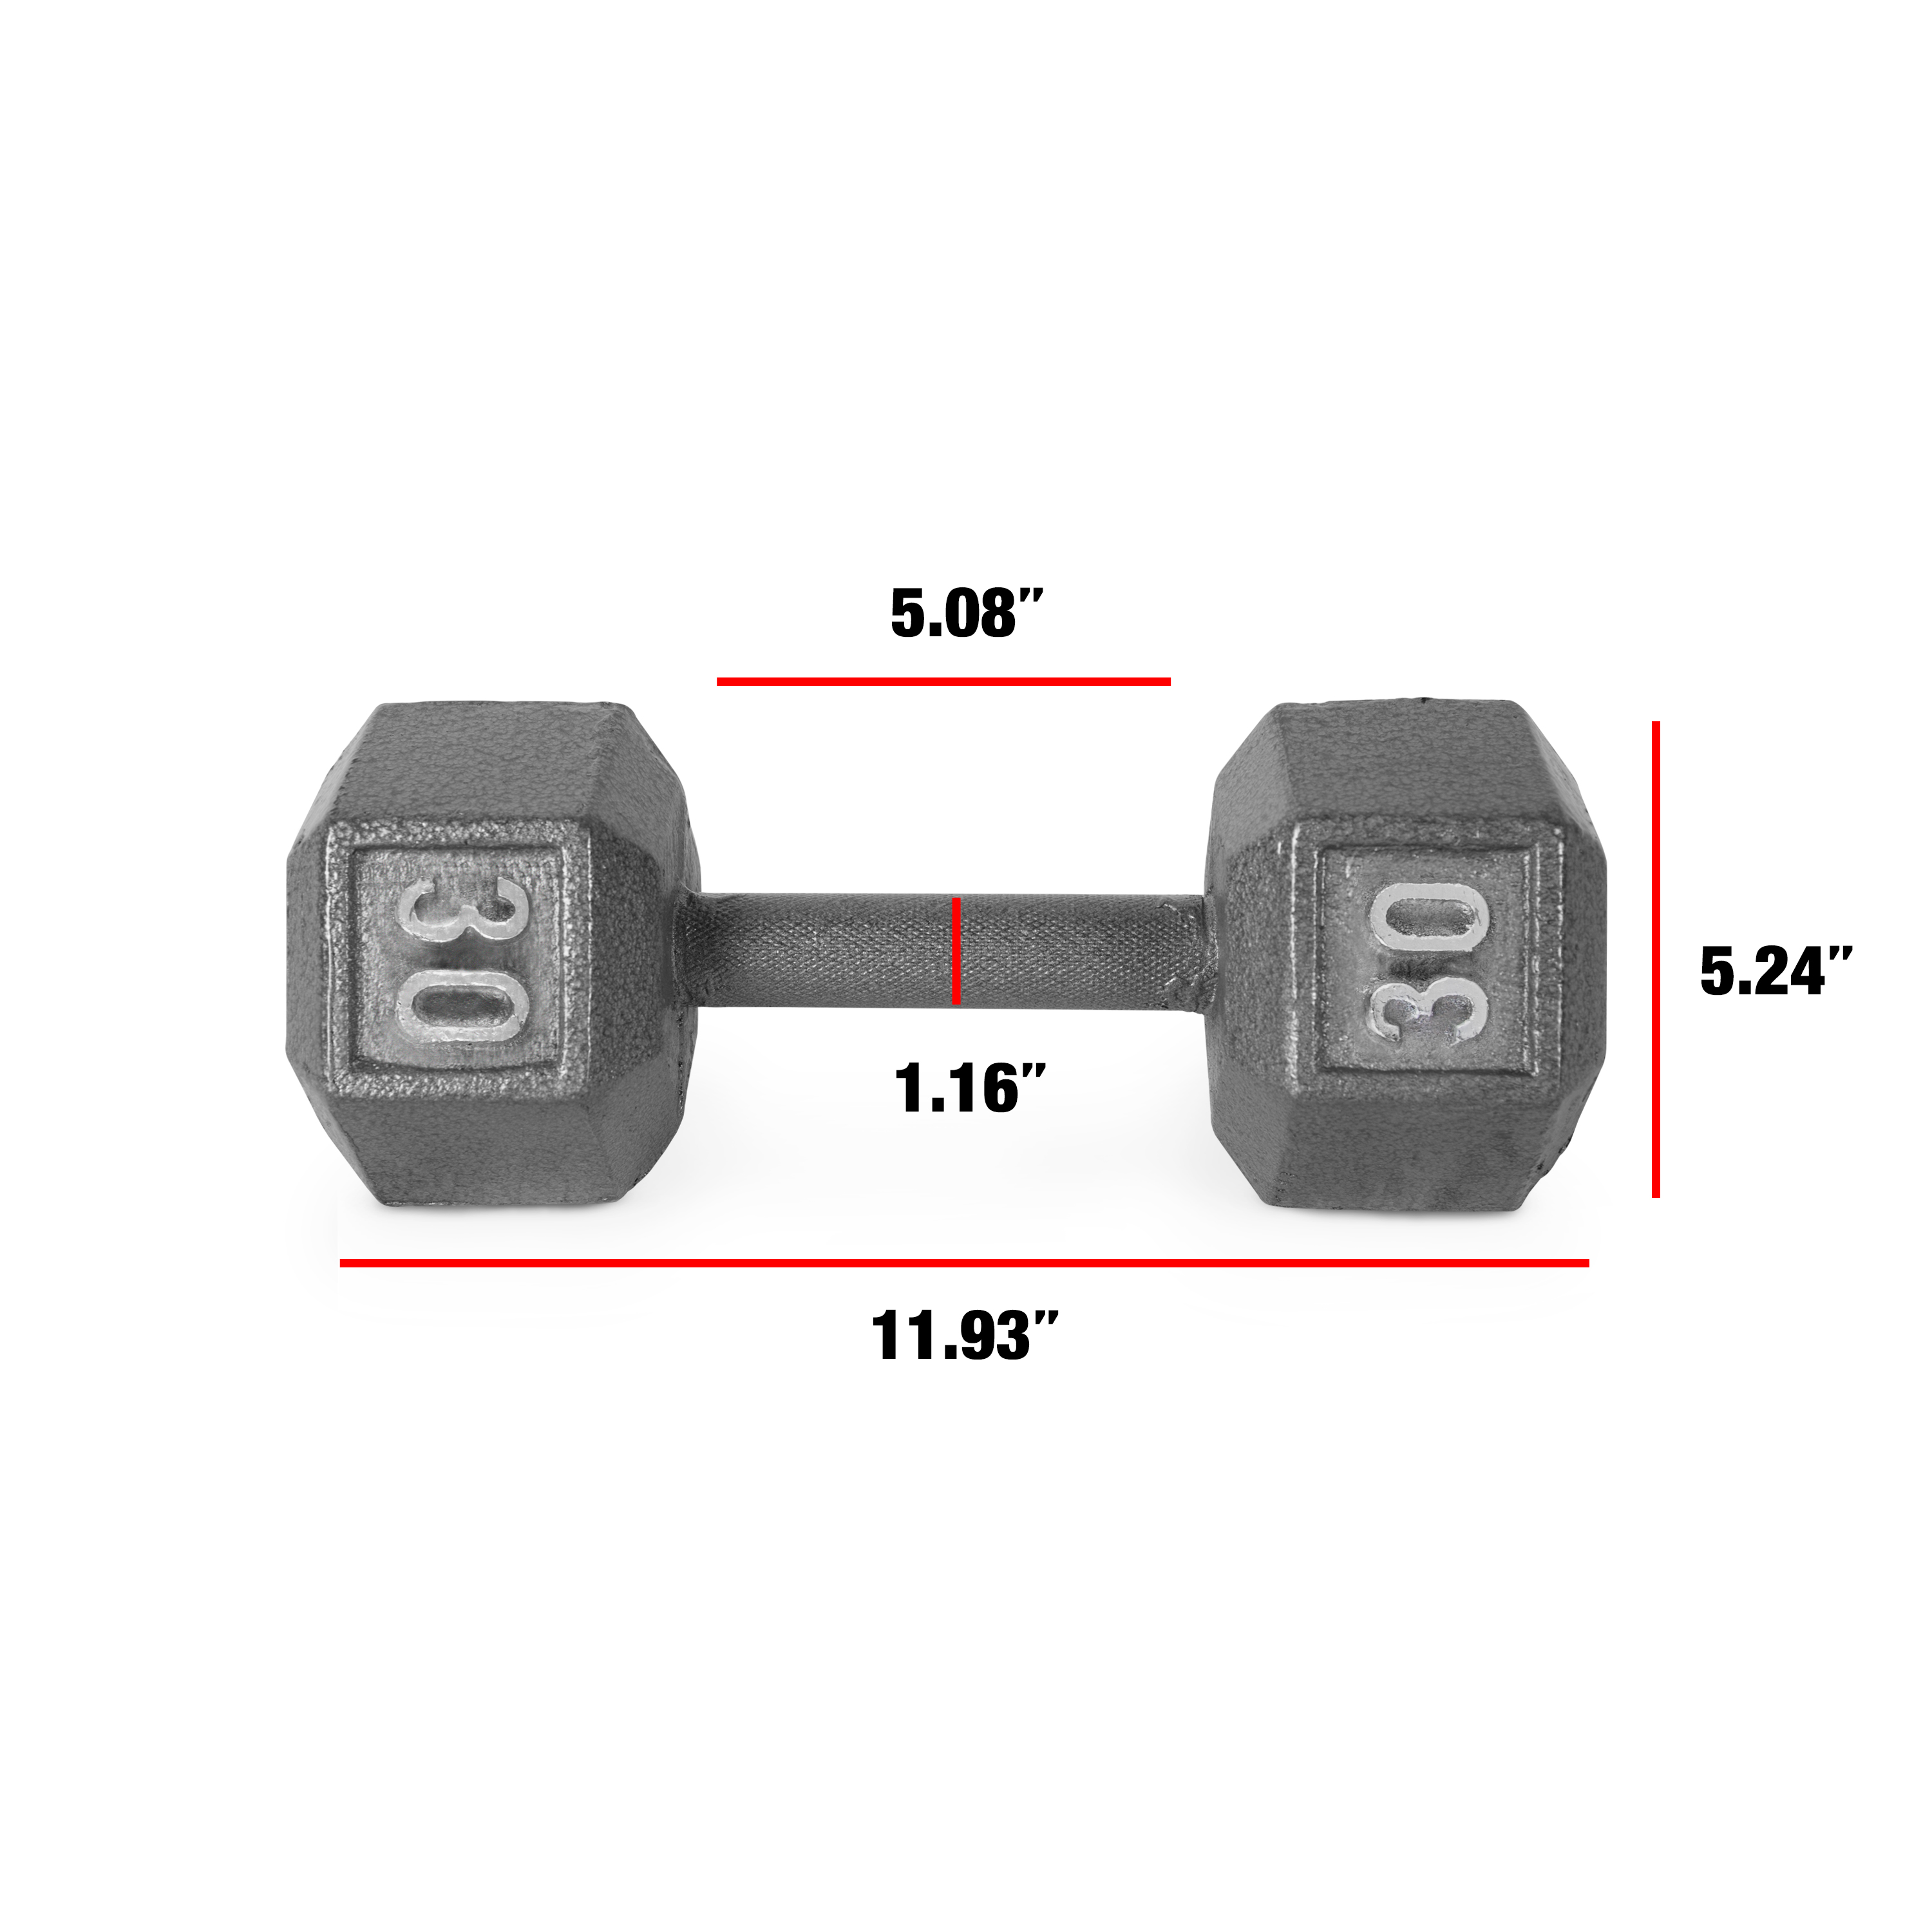 CAP Barbell 30lb Cast Iron Hex Dumbbell, Single - image 4 of 6